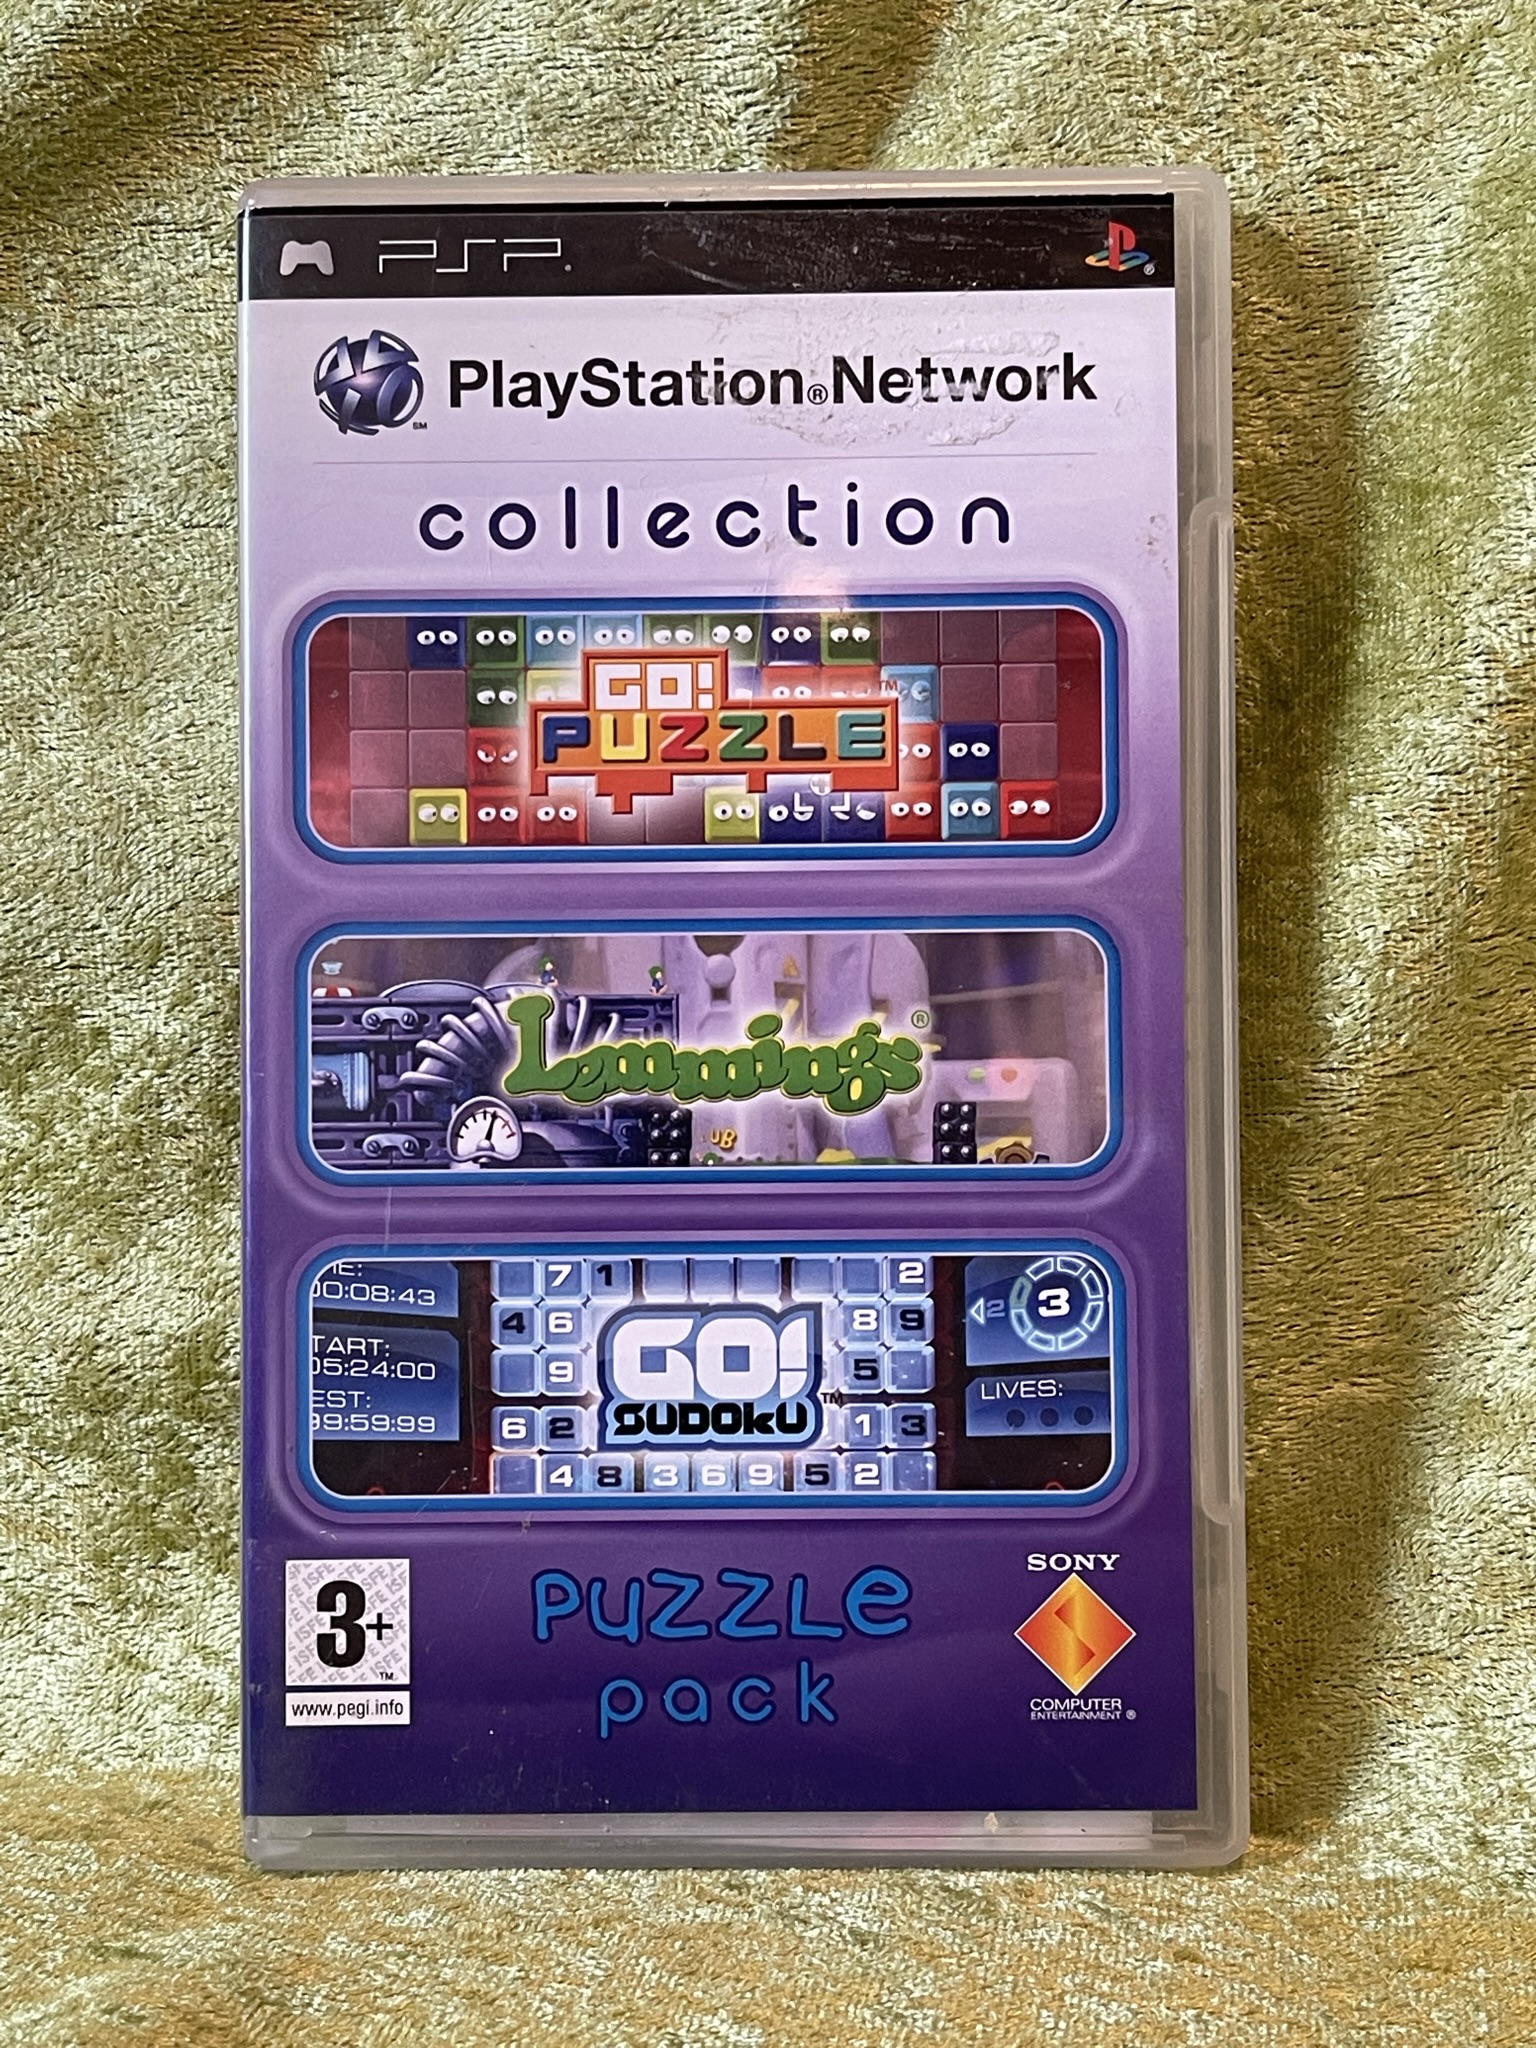 Playstation Network Collection